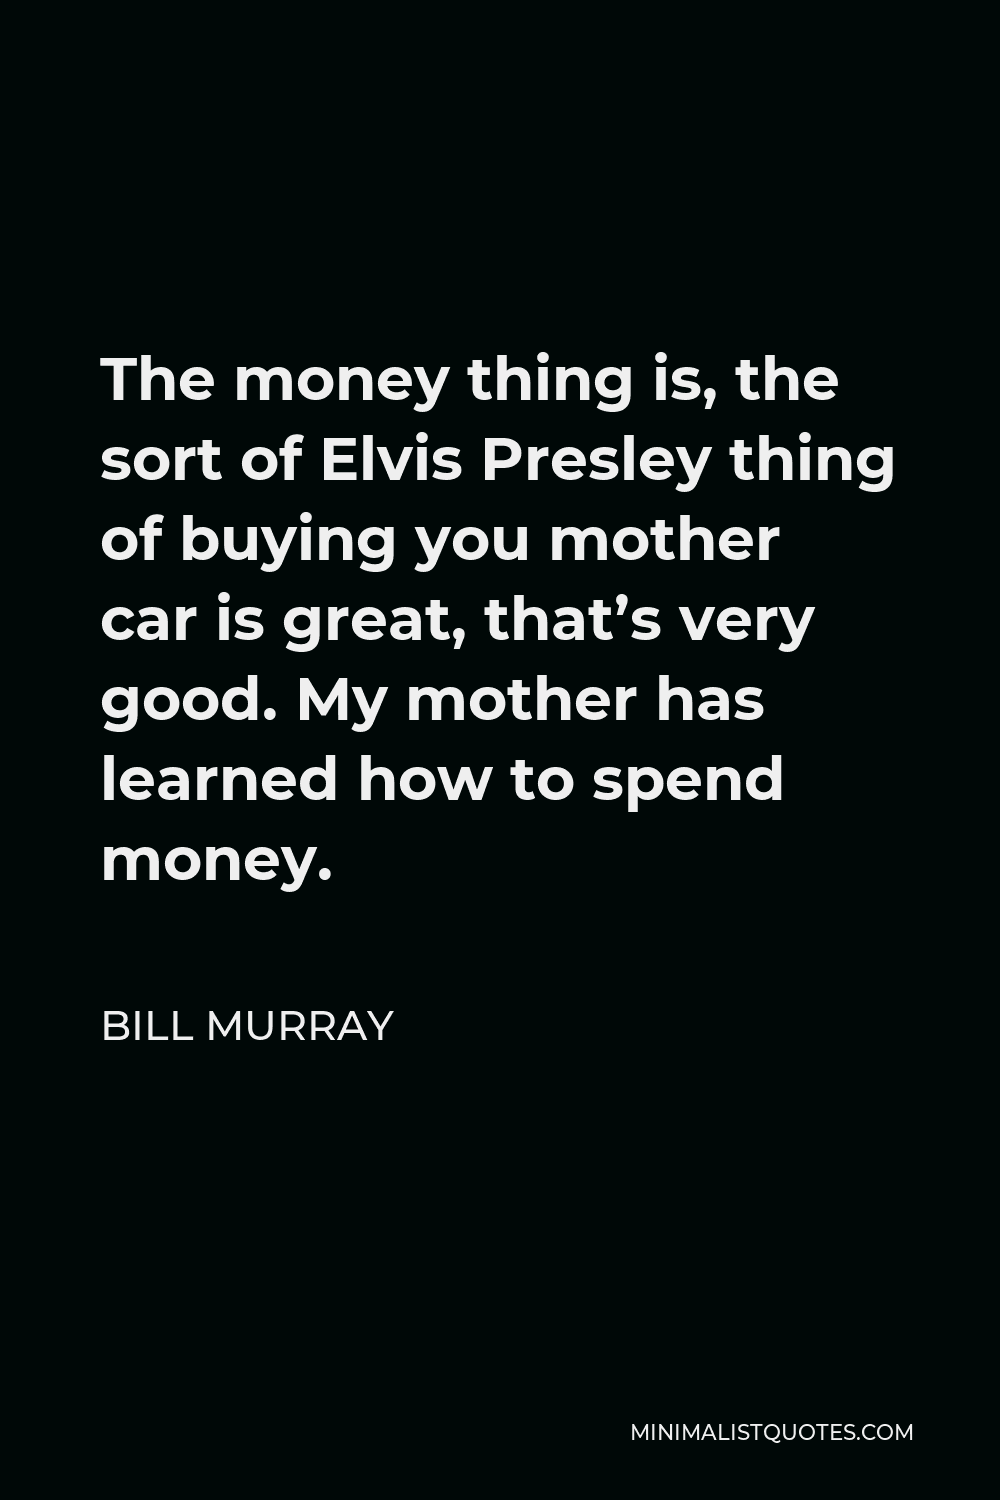 Bill Murray Quote - The money thing is, the sort of Elvis Presley thing of buying you mother car is great, that’s very good. My mother has learned how to spend money.